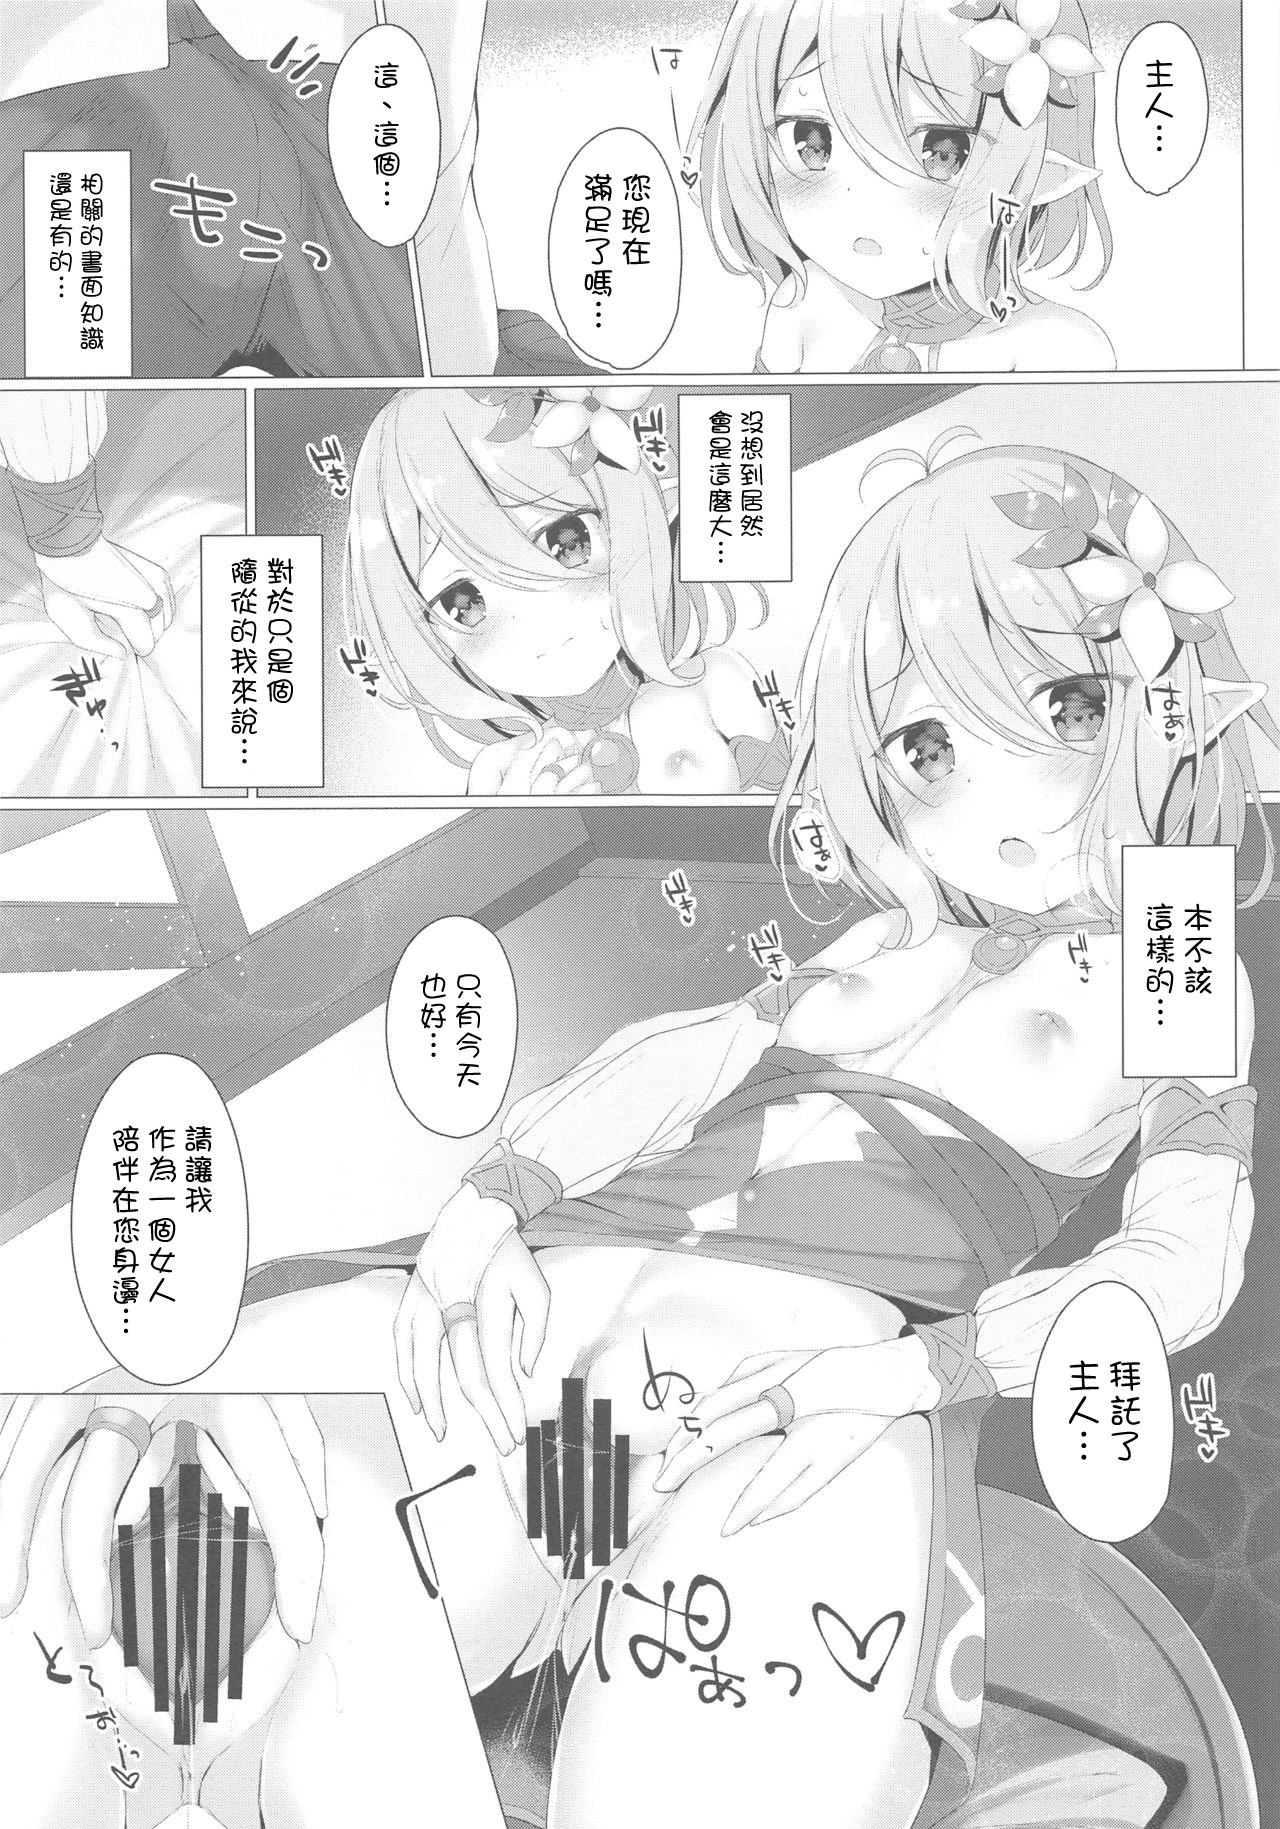 (SC2019 Autumn) [Twilight Road (Tomo)] Kokkoro-chan to Connect Shitai! (Princess Connect! Re:Dive) [Chinese] [一色汉化组] page 6 full